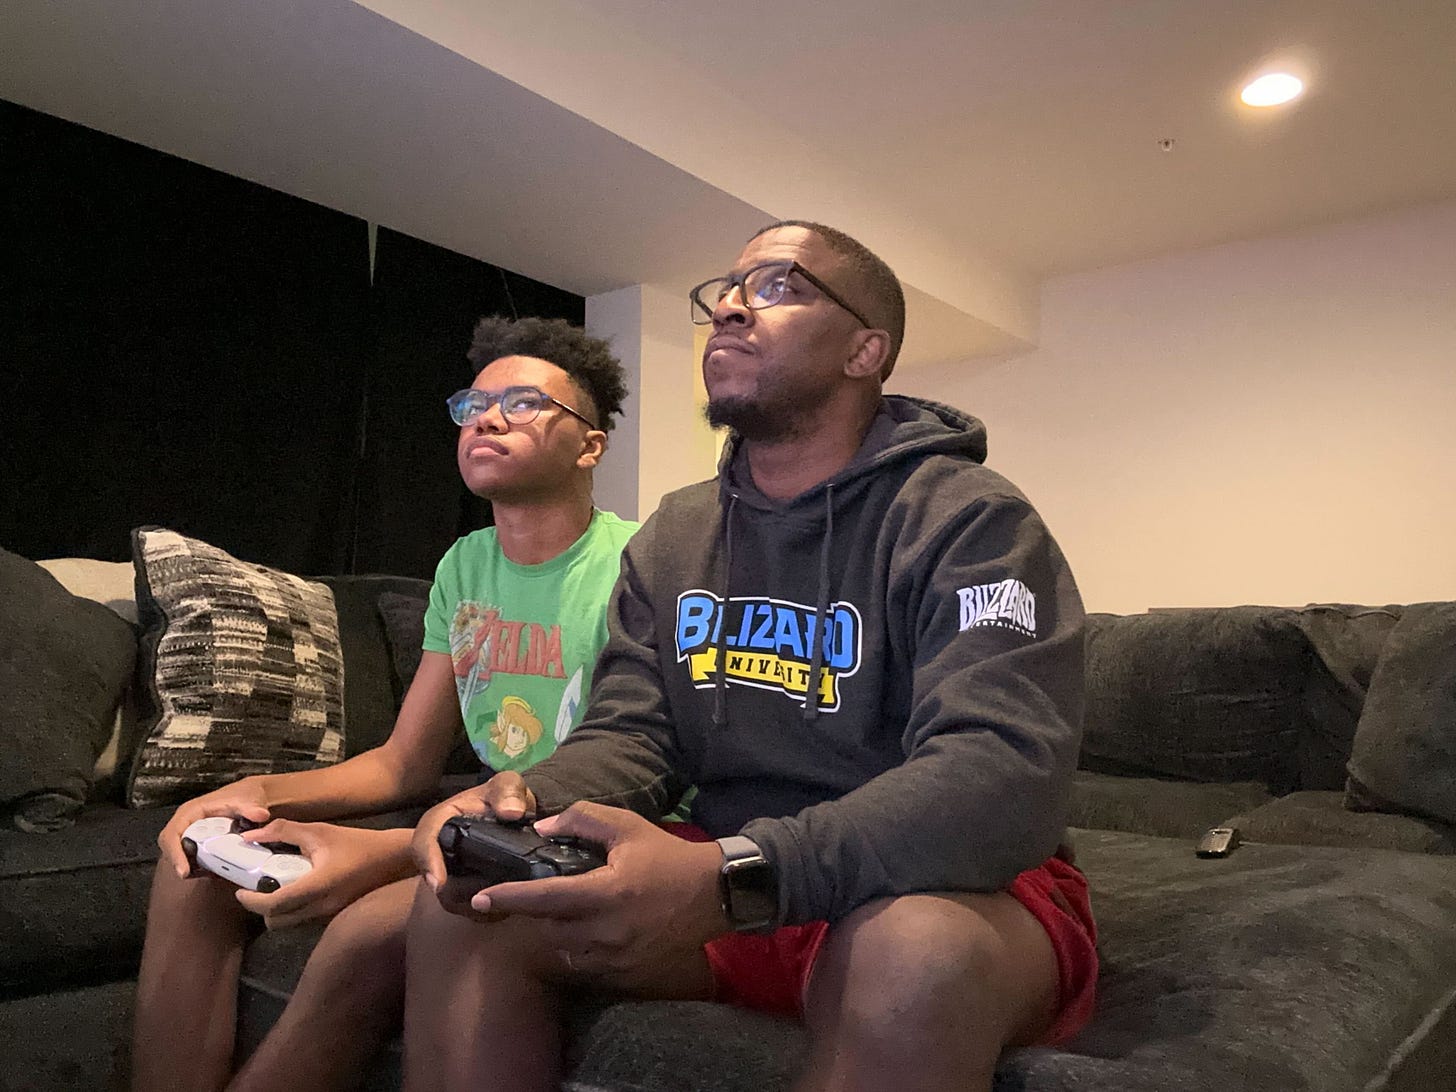 A candid photograph of Max Levasseur and his son Christian playing video games at home.